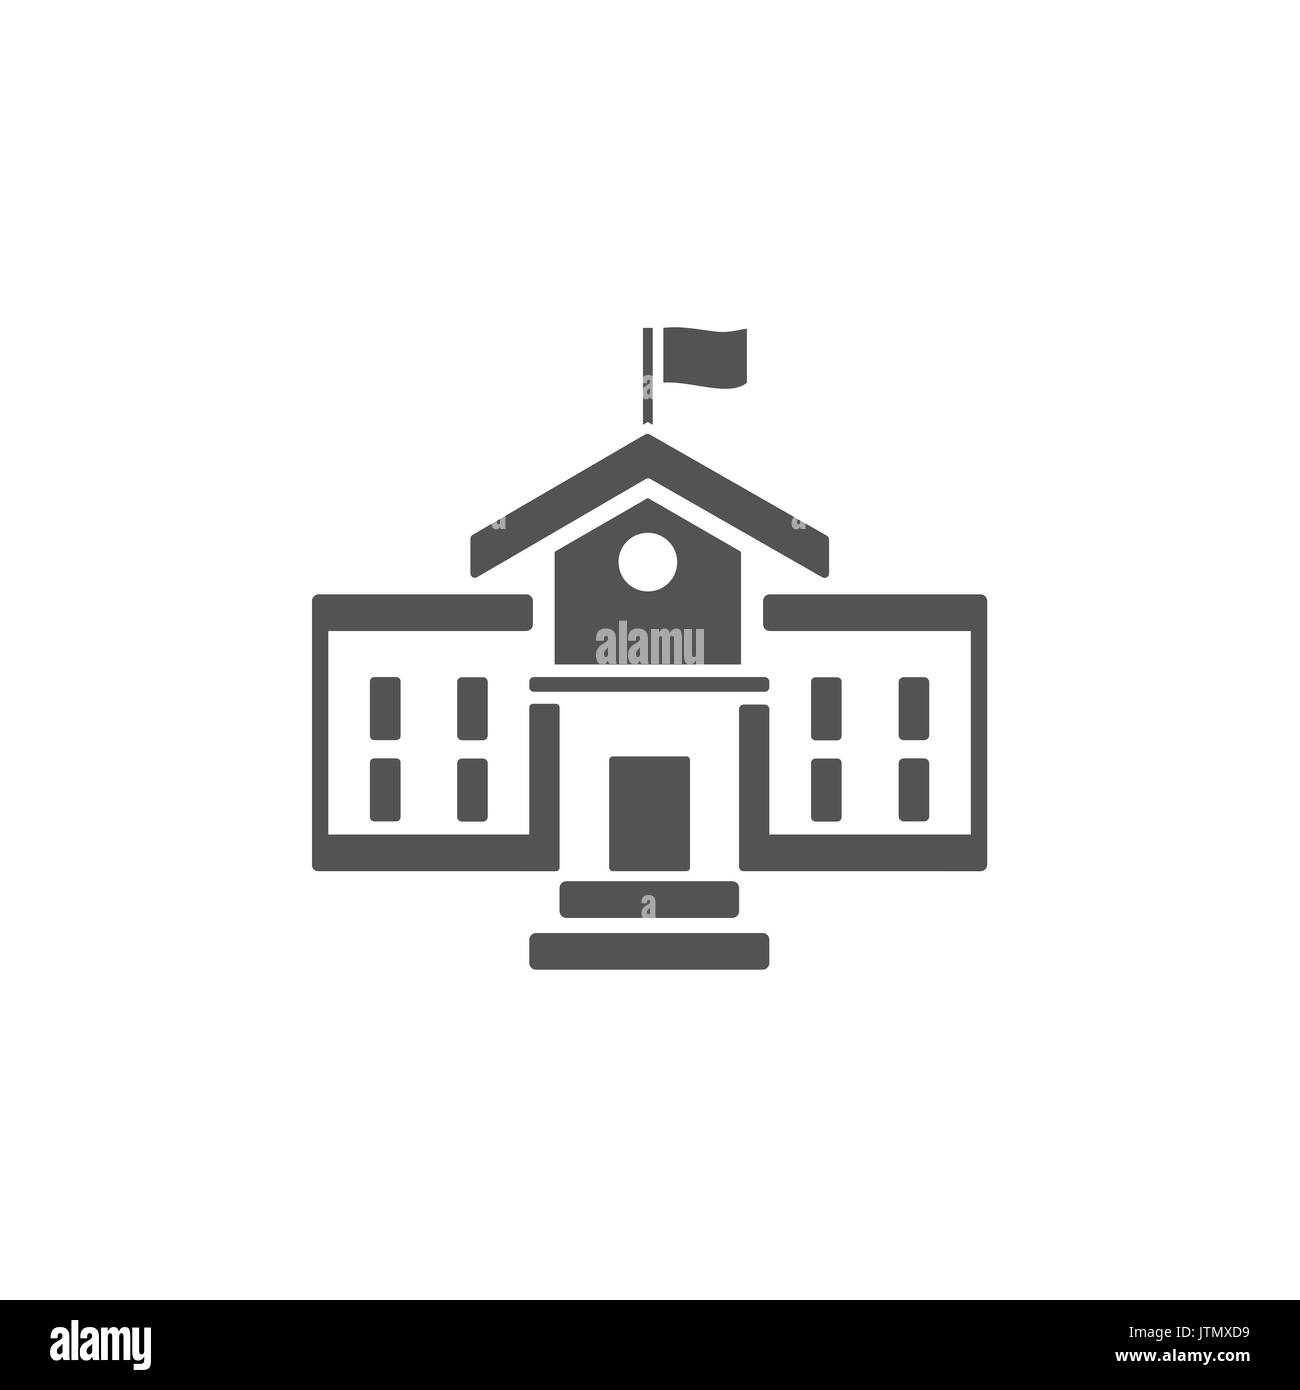 School building icon on a white background Stock Vector